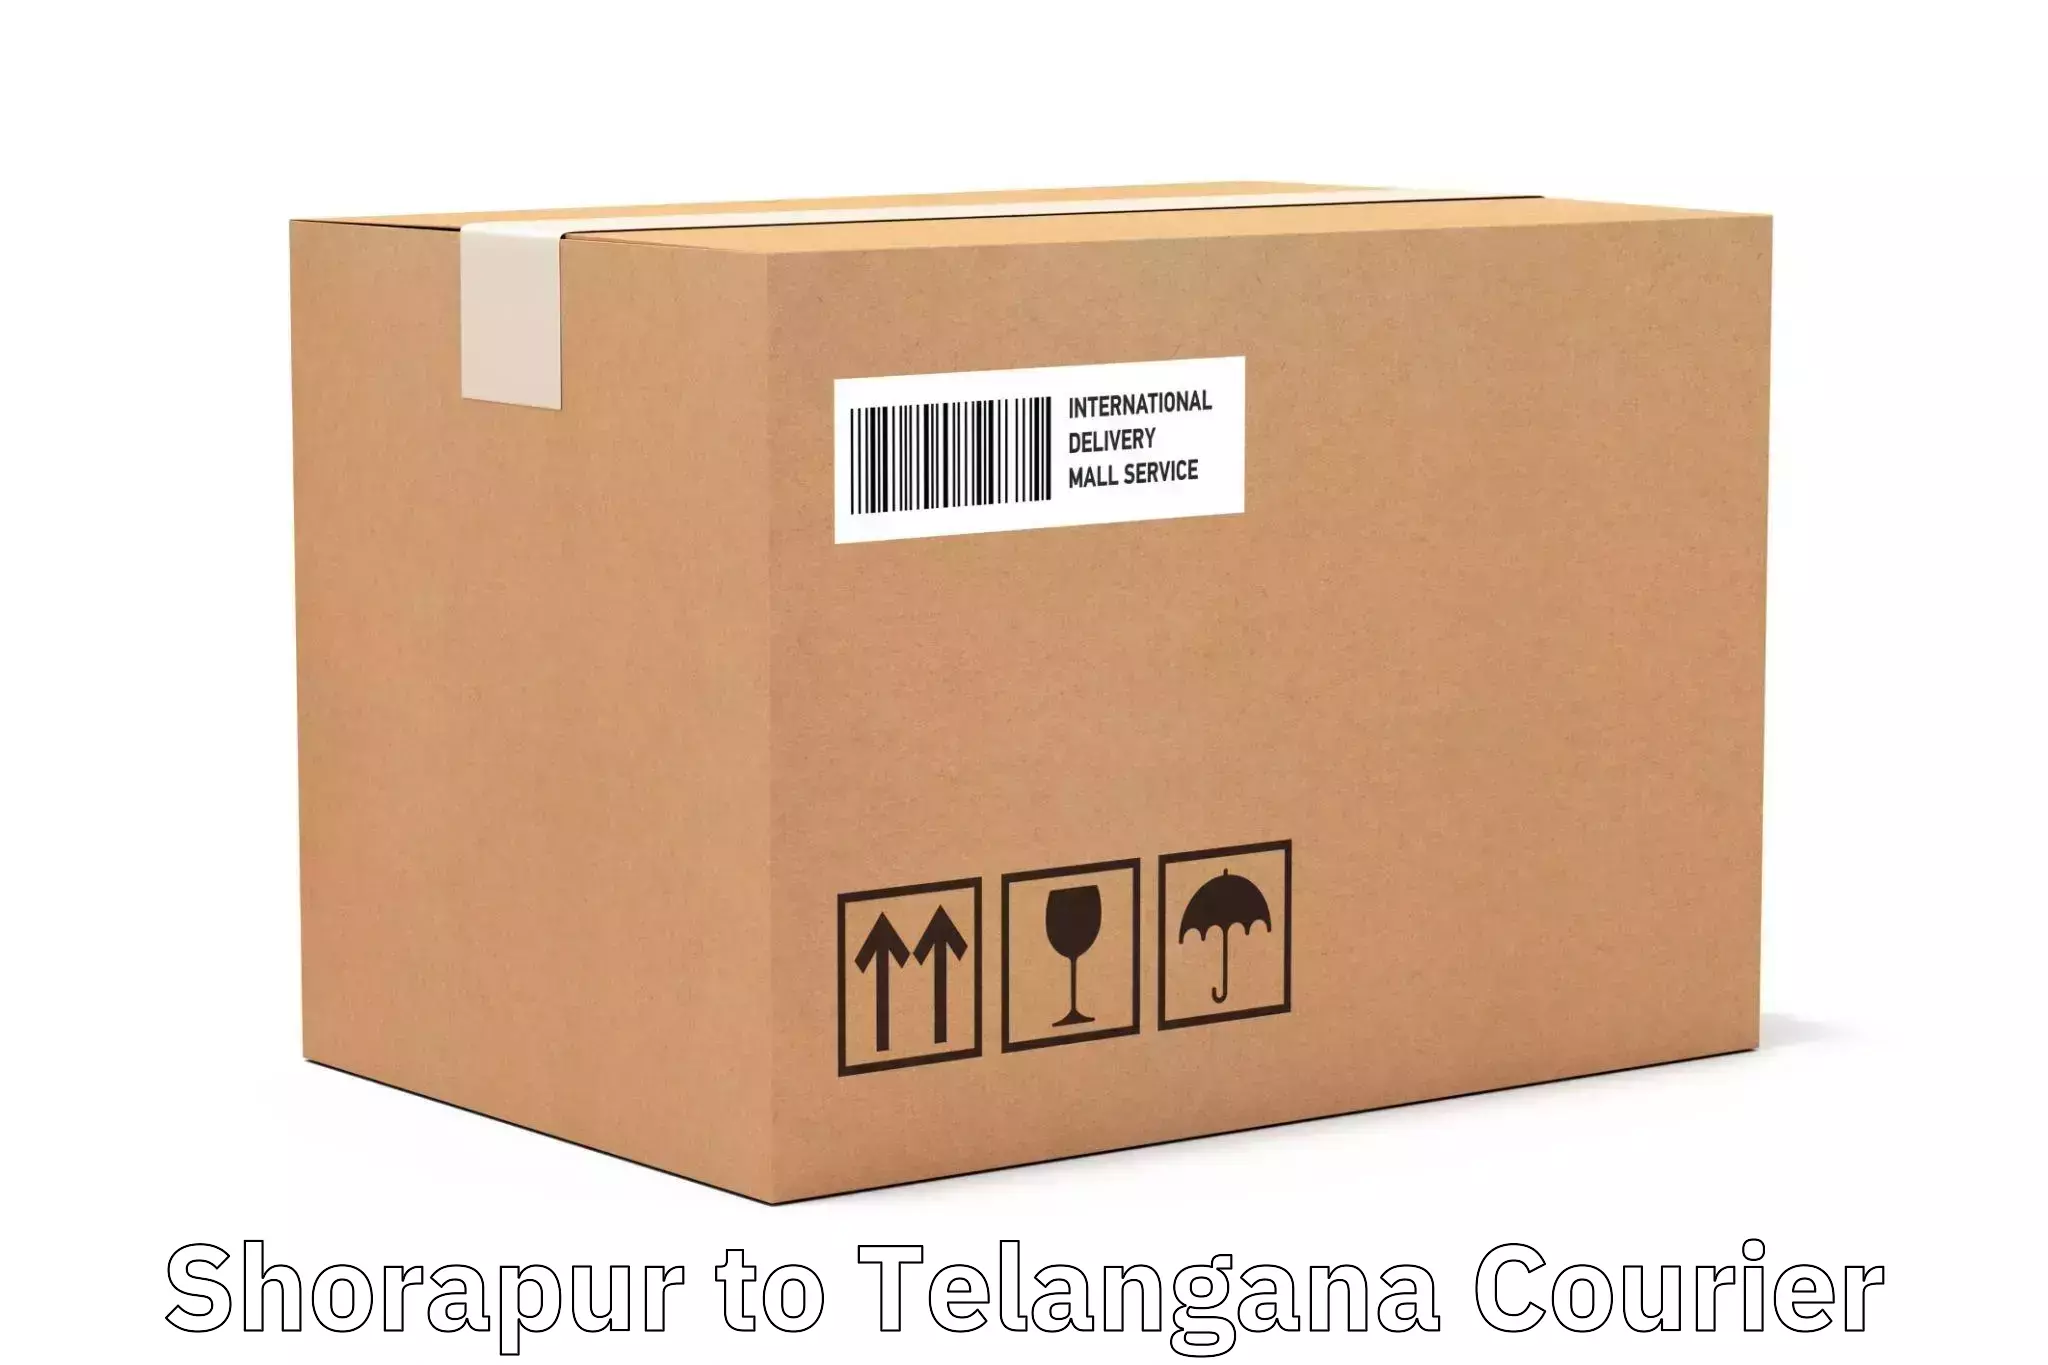 High-capacity parcel service in Shorapur to Secunderabad